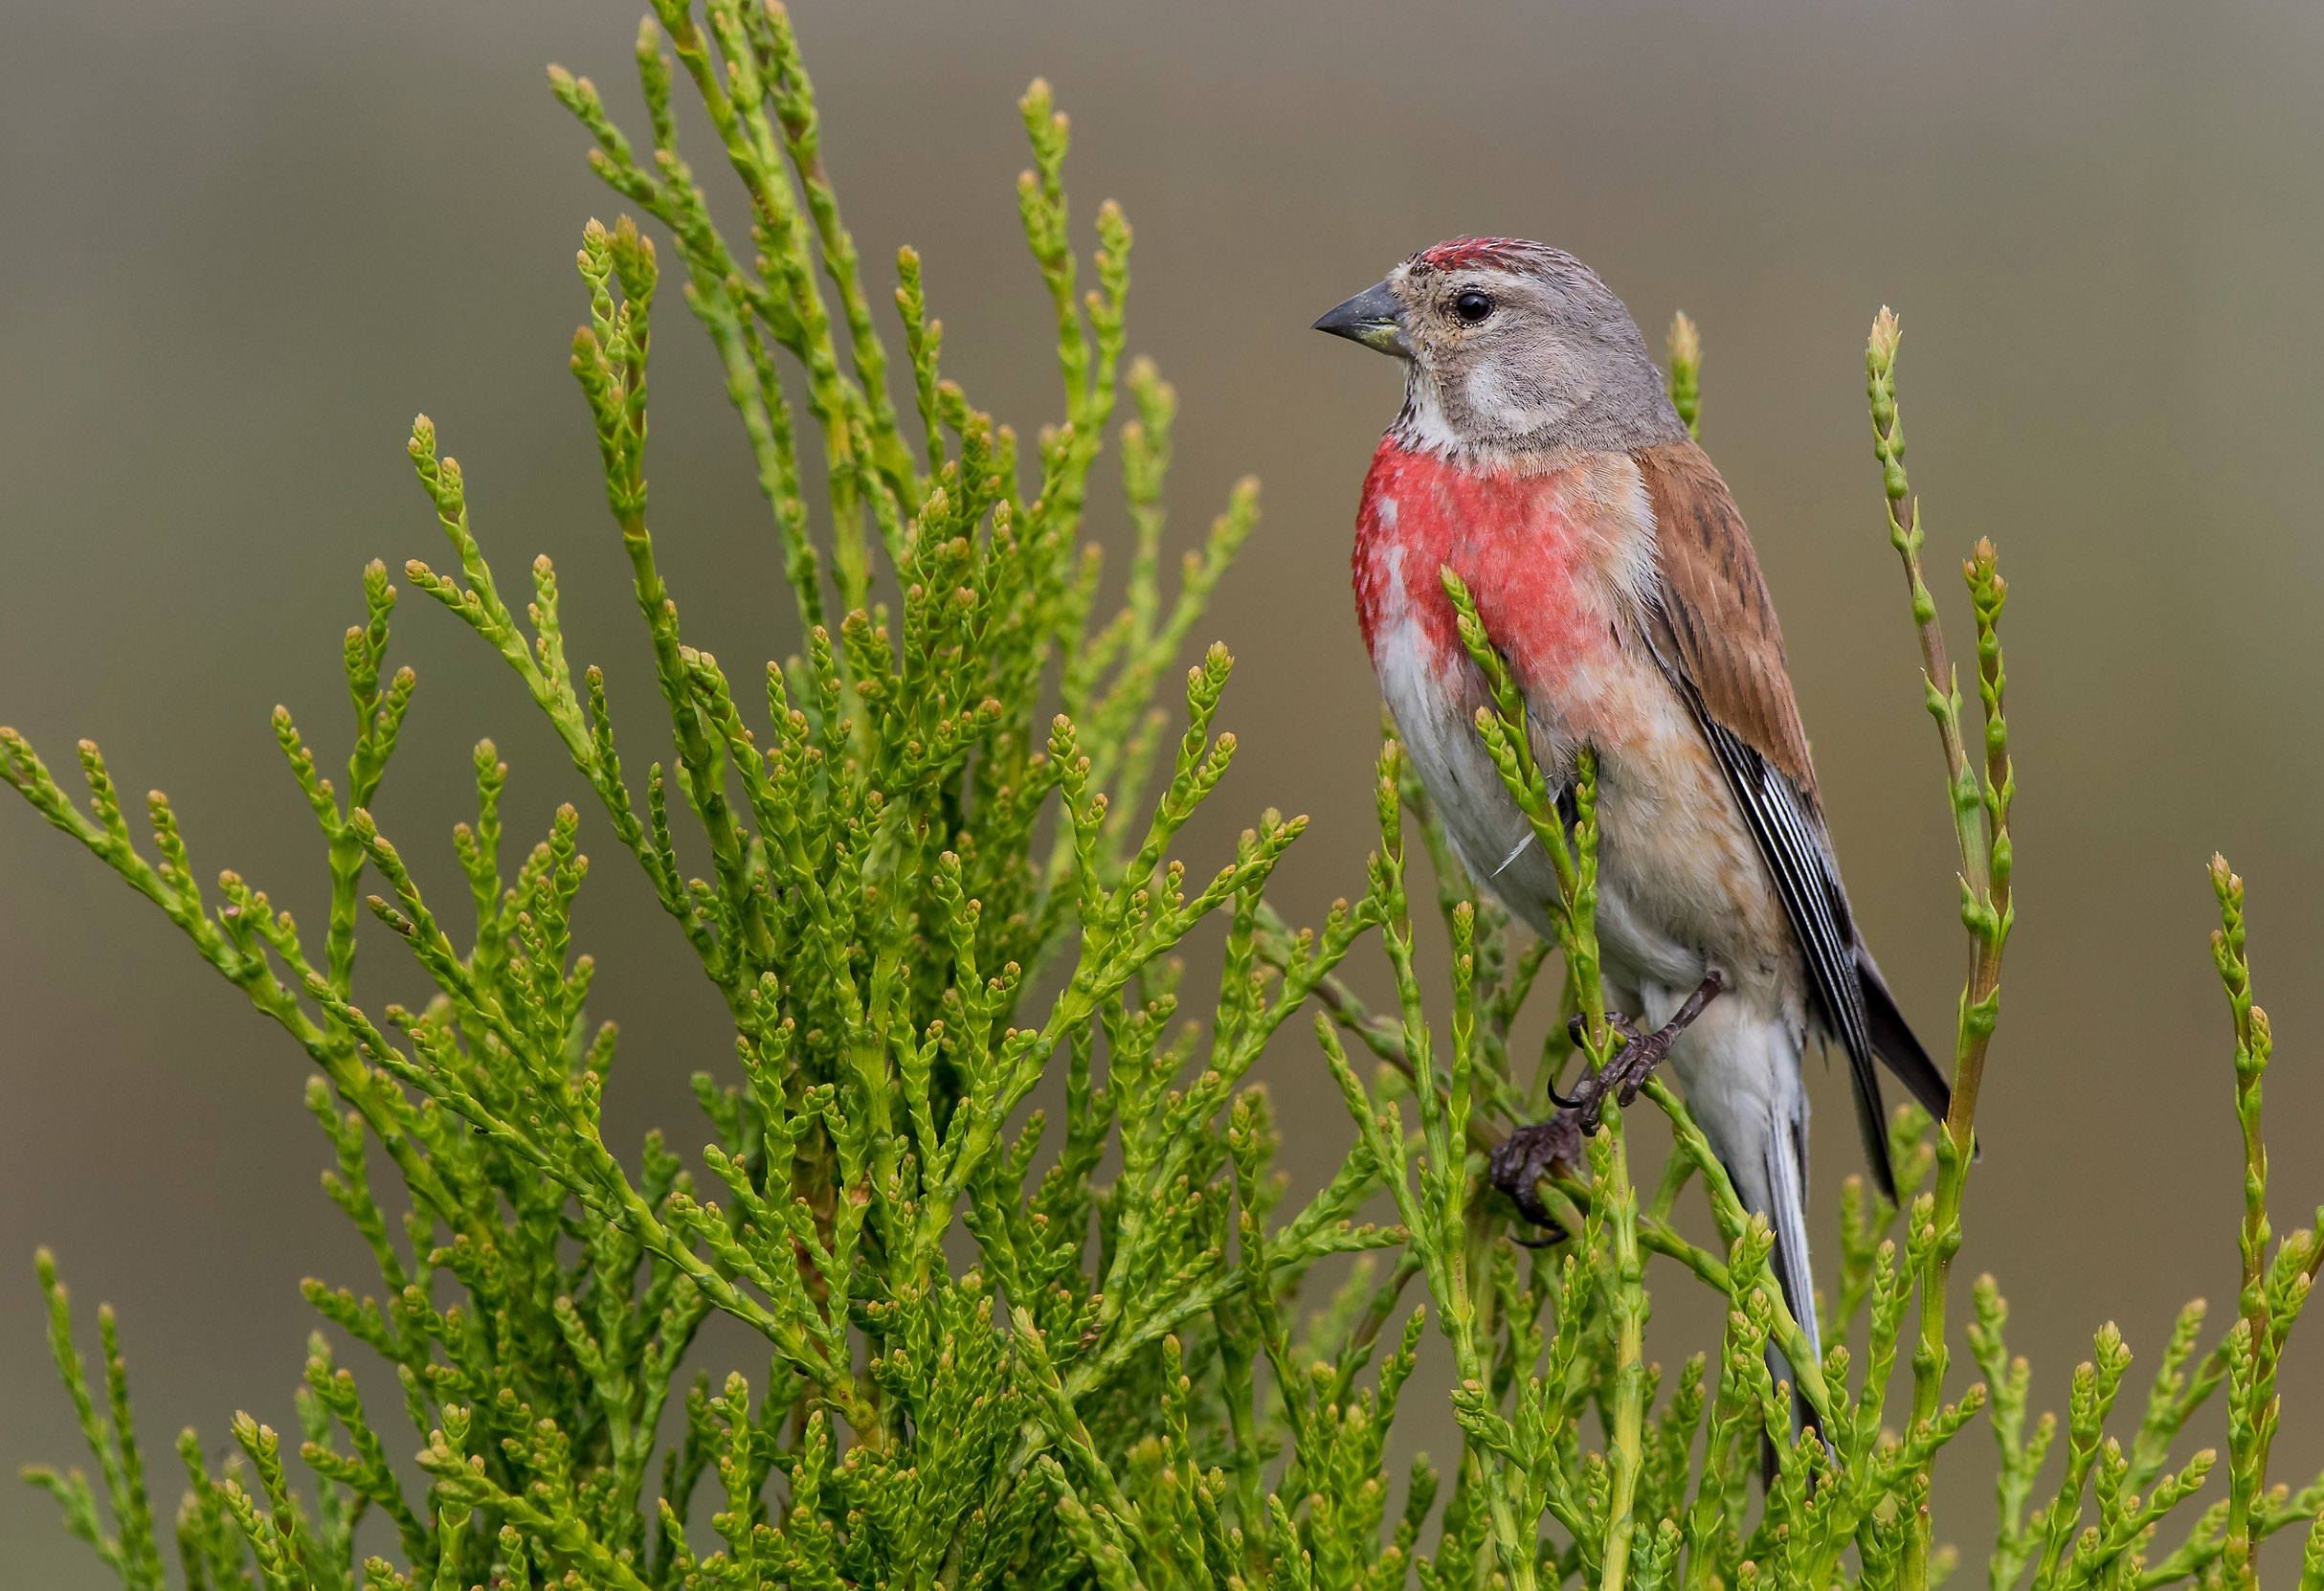 A lone Linnet perched at the top of a tree.